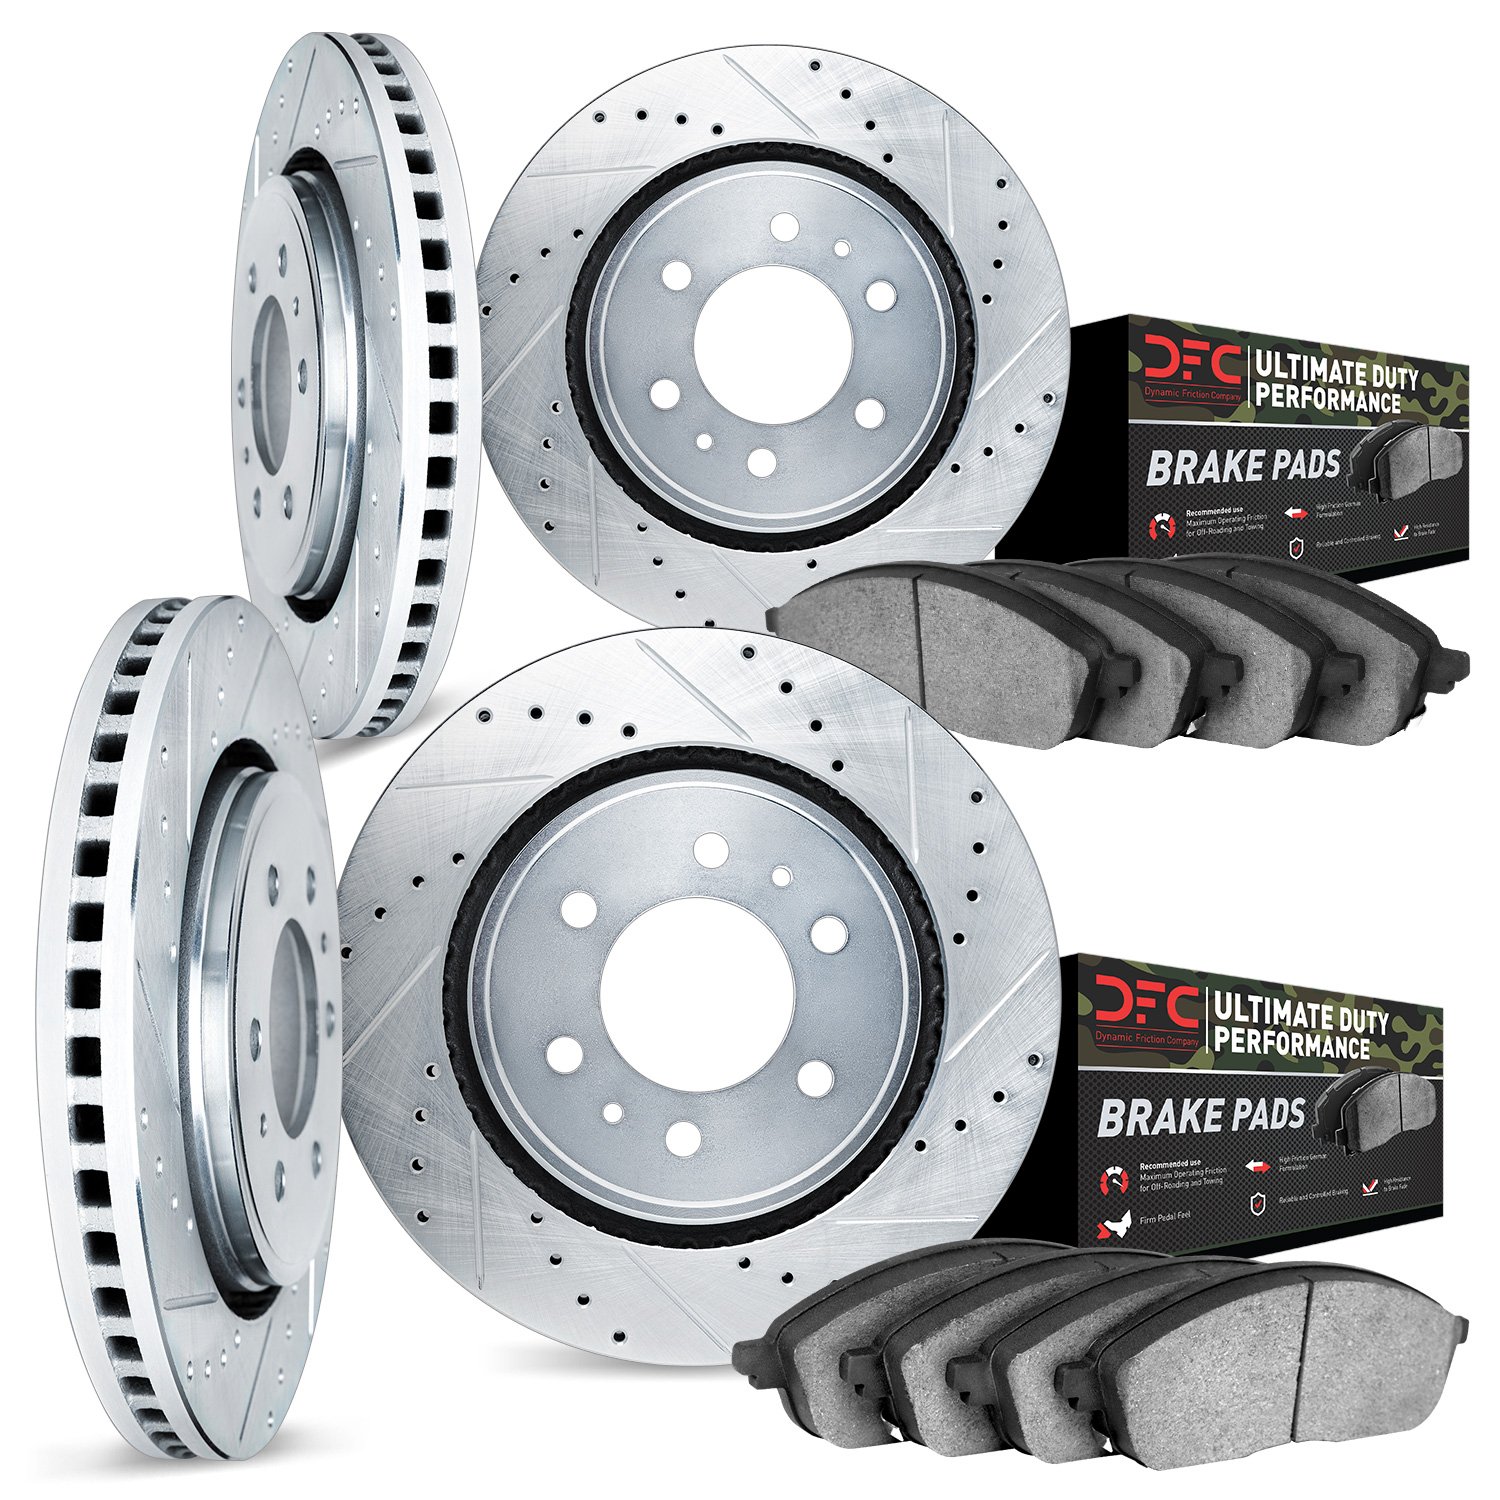 7404-54050 Drilled/Slotted Brake Rotors with Ultimate-Duty Brake Pads Kit [Silver], 2018-2021 Ford/Lincoln/Mercury/Mazda, Positi